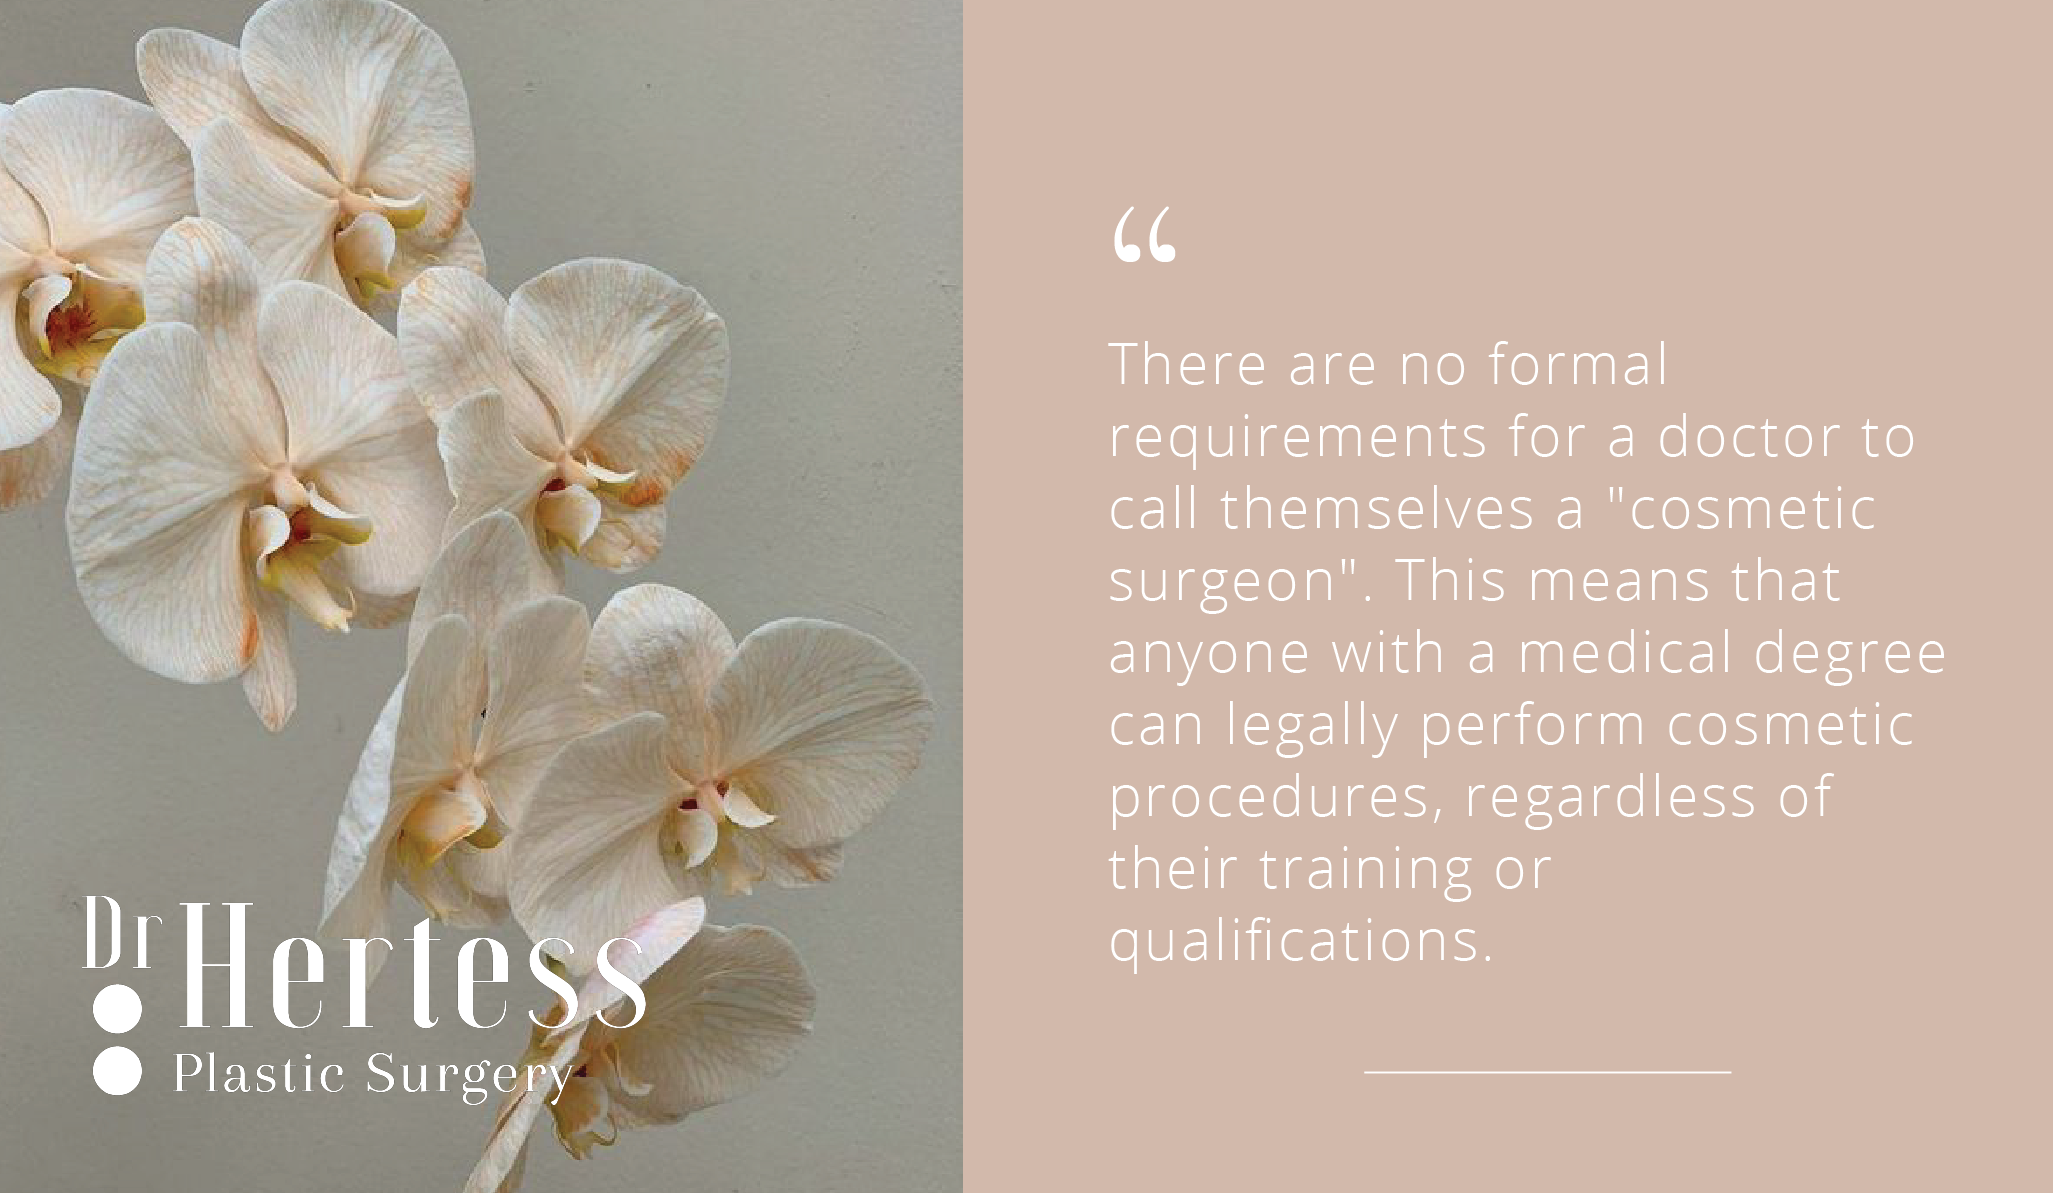 Take caution when opting for a Cosmetic Surgeon